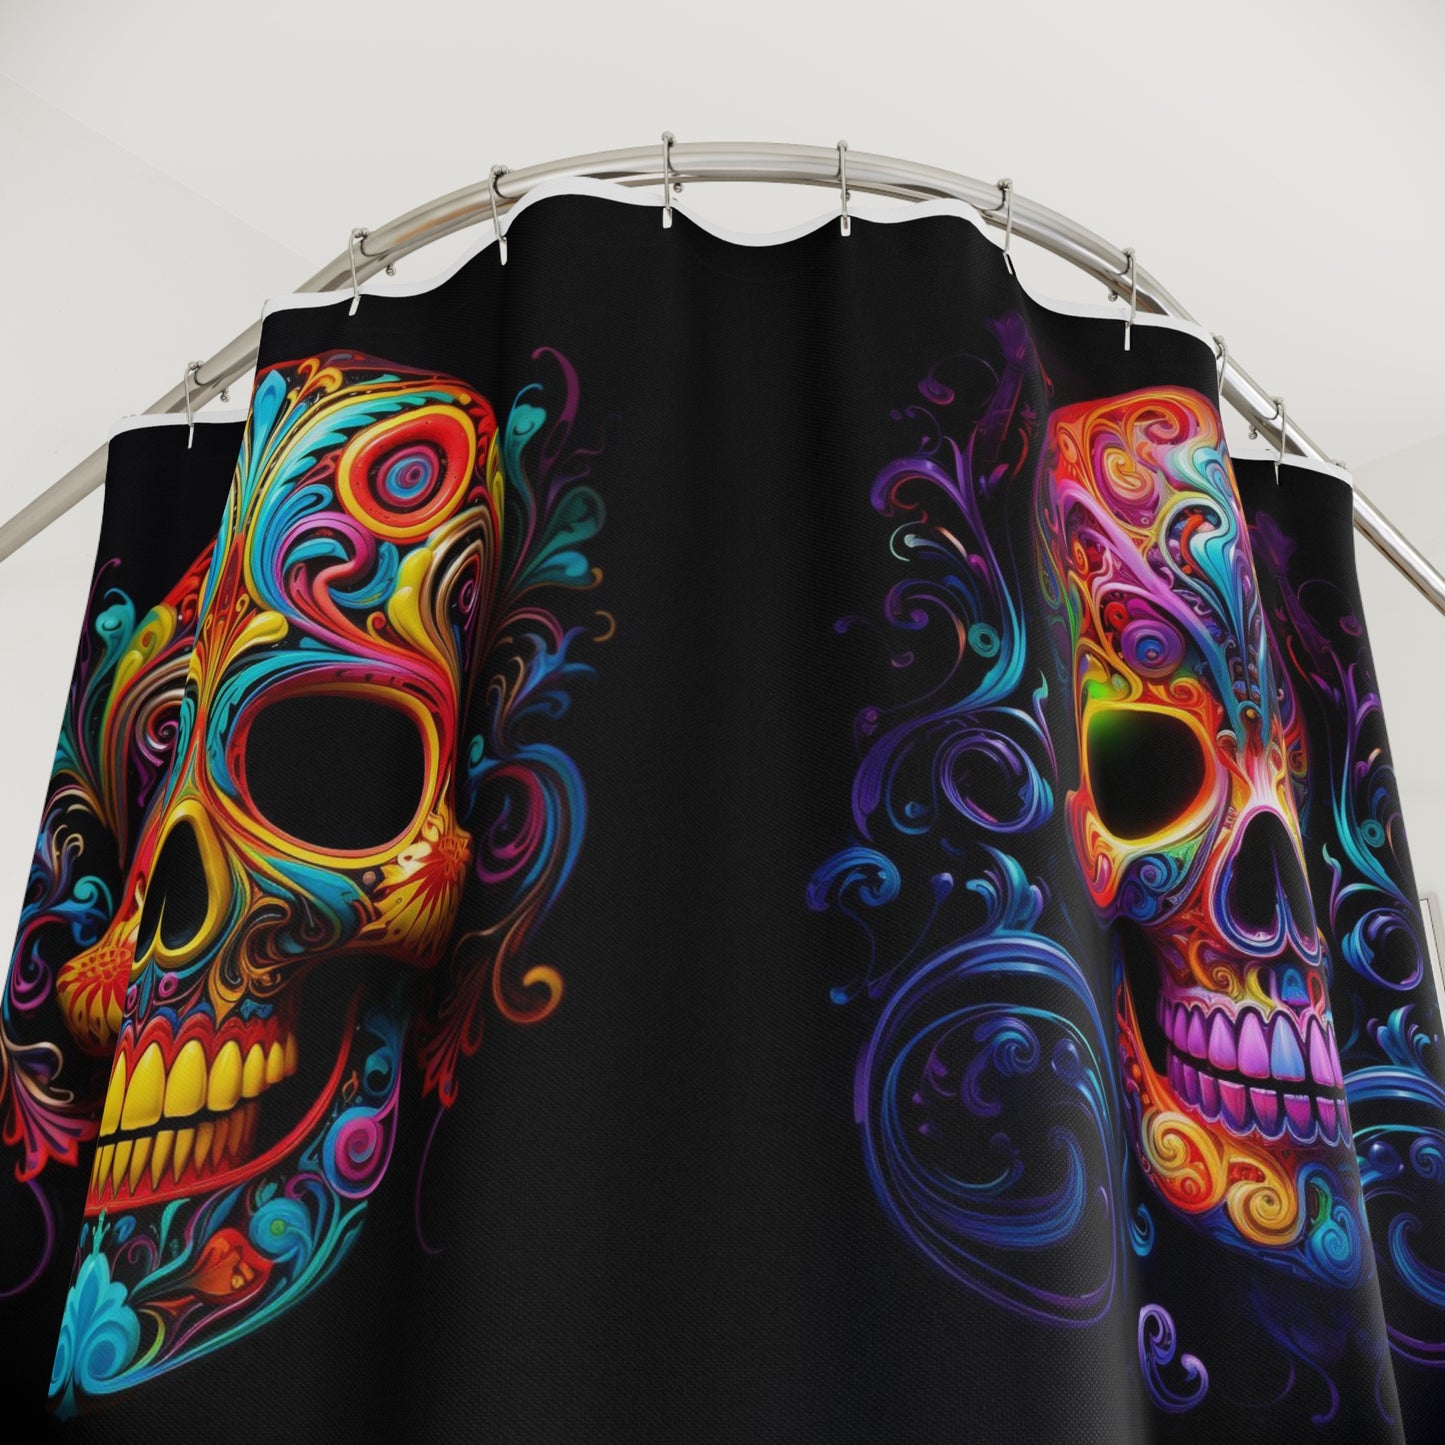 Polyester Shower Curtain Macro Skull Color 5